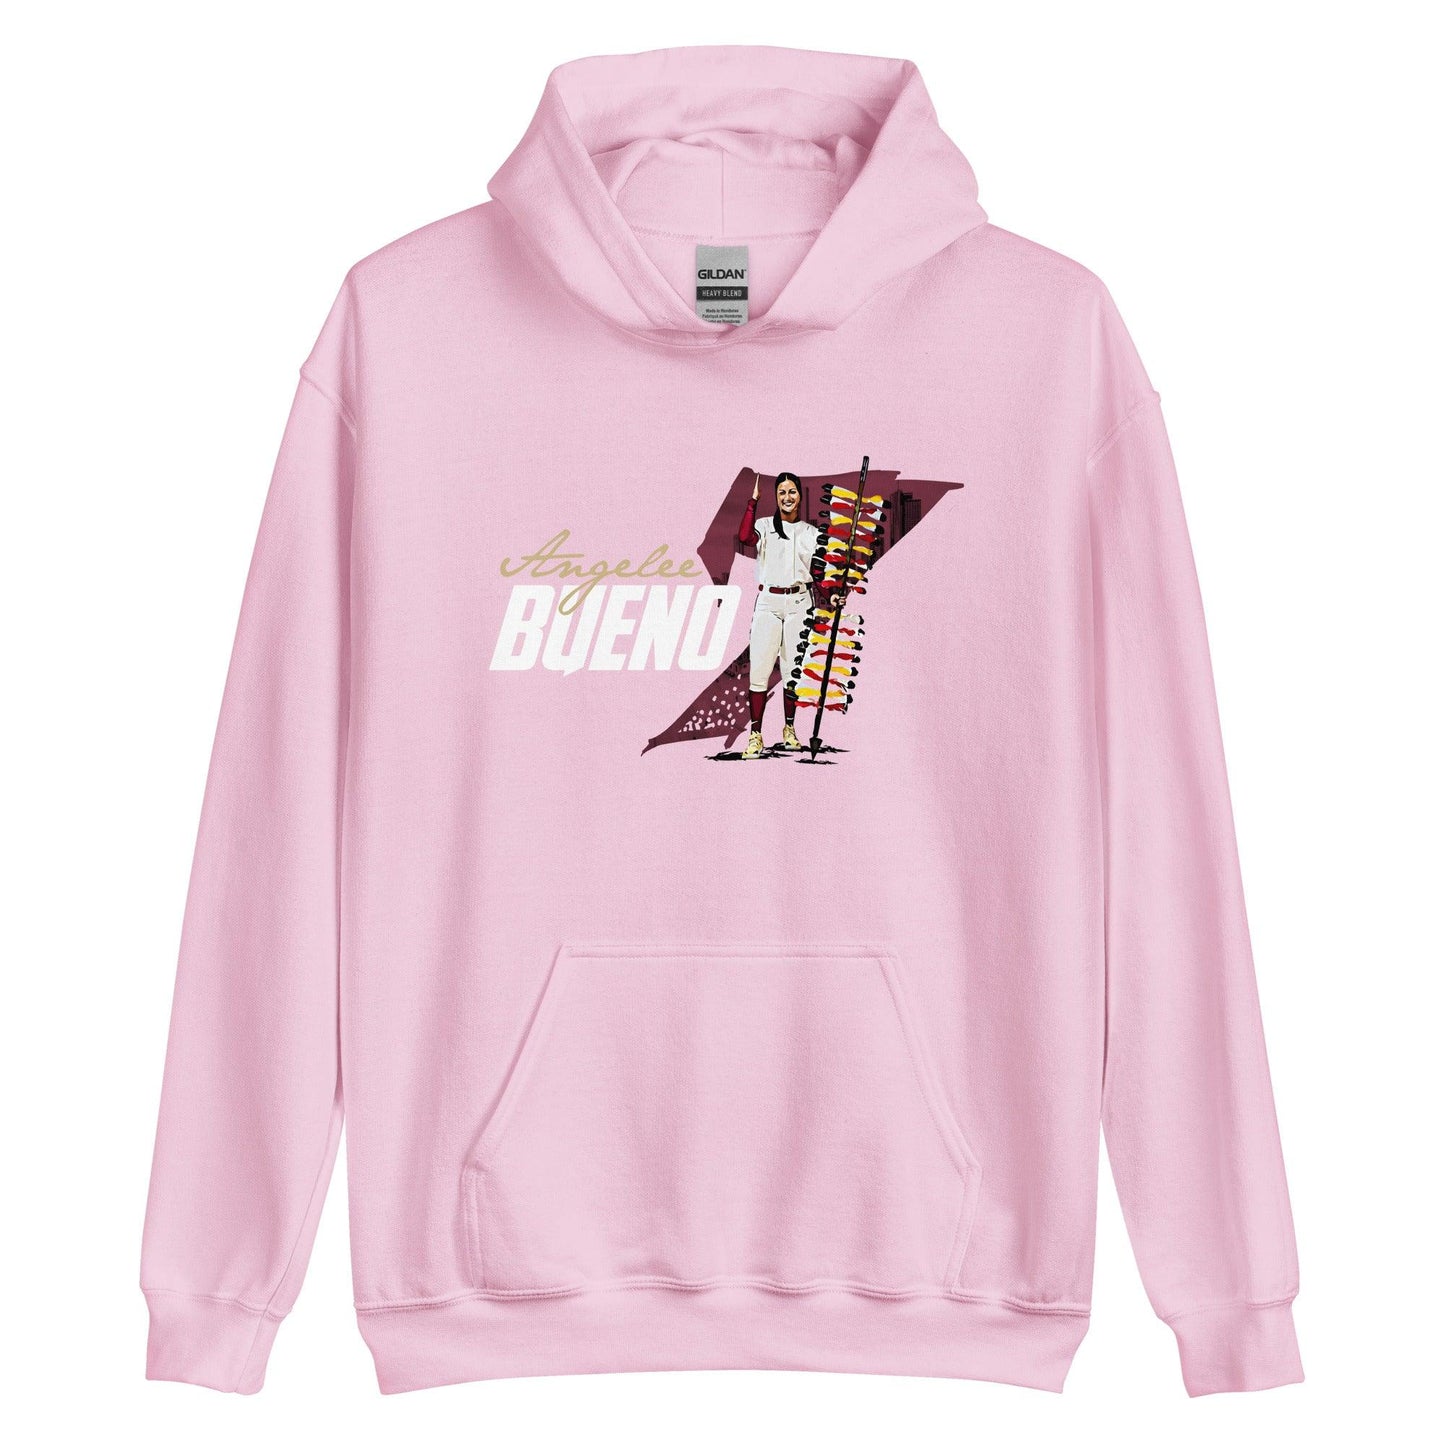 Angelee Bueno "Gameday" Hoodie - Fan Arch